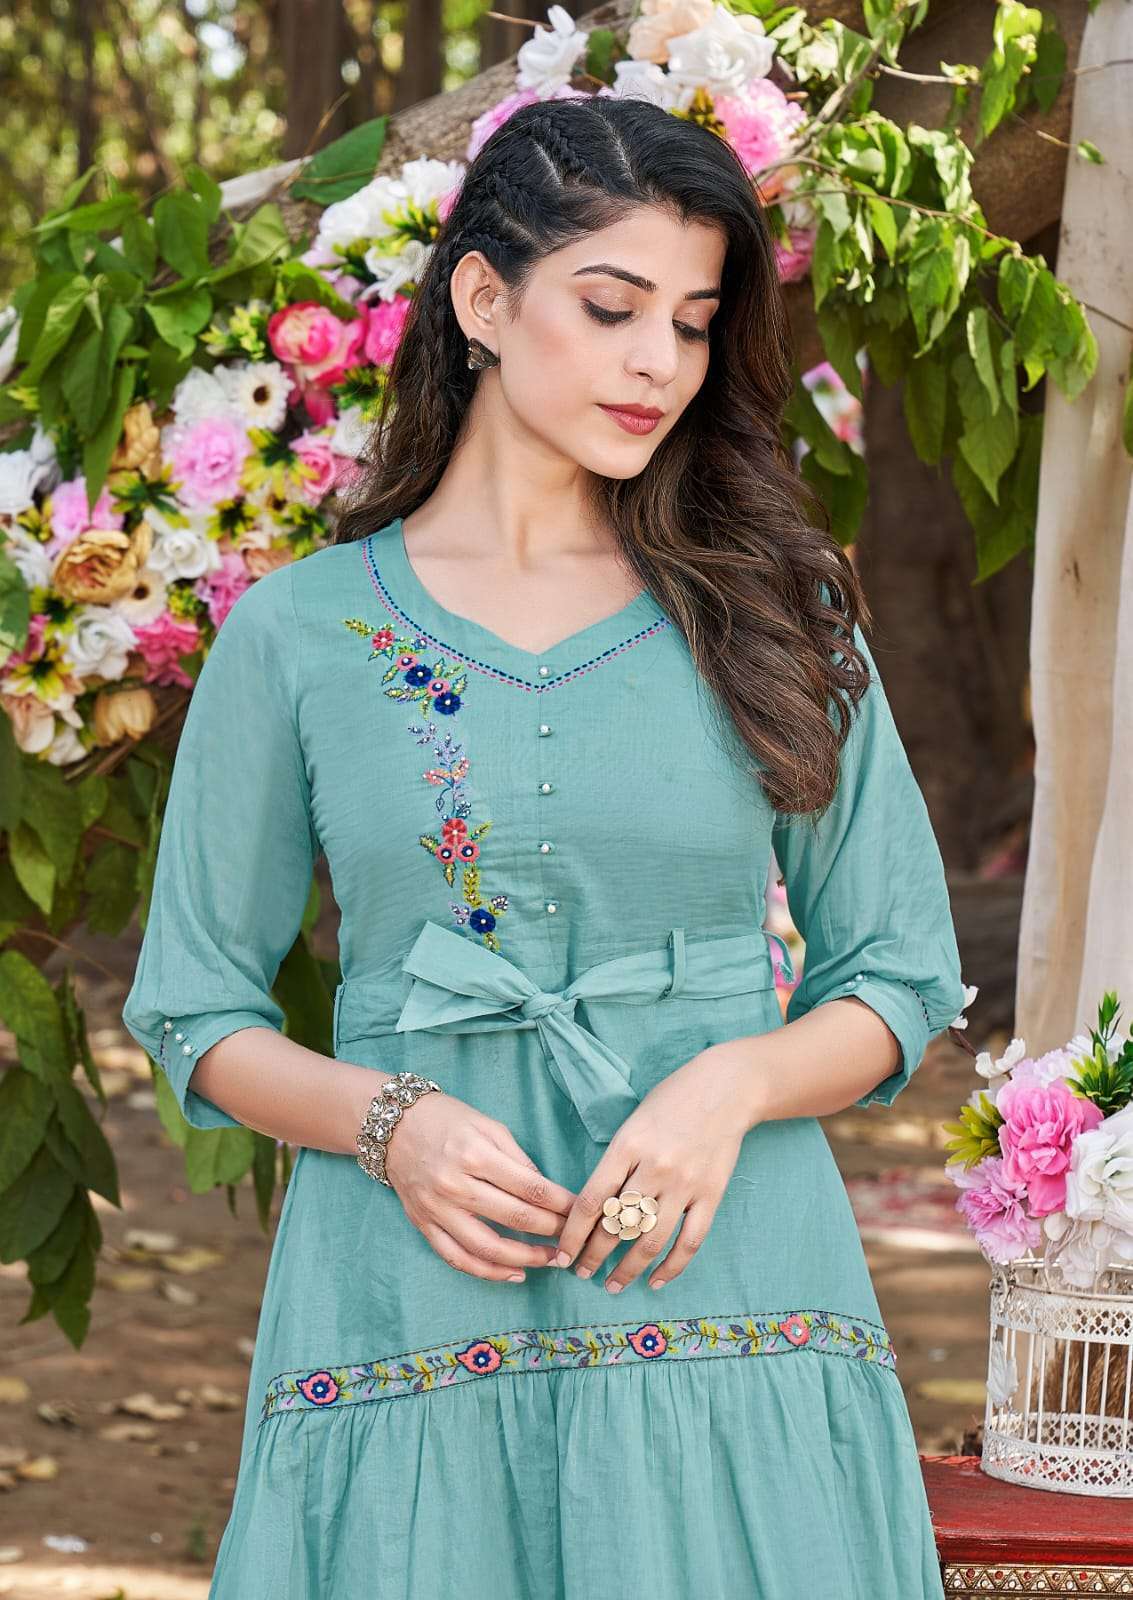 Golden 3/4 sleeves Kurti/Tunic with designer embroidery